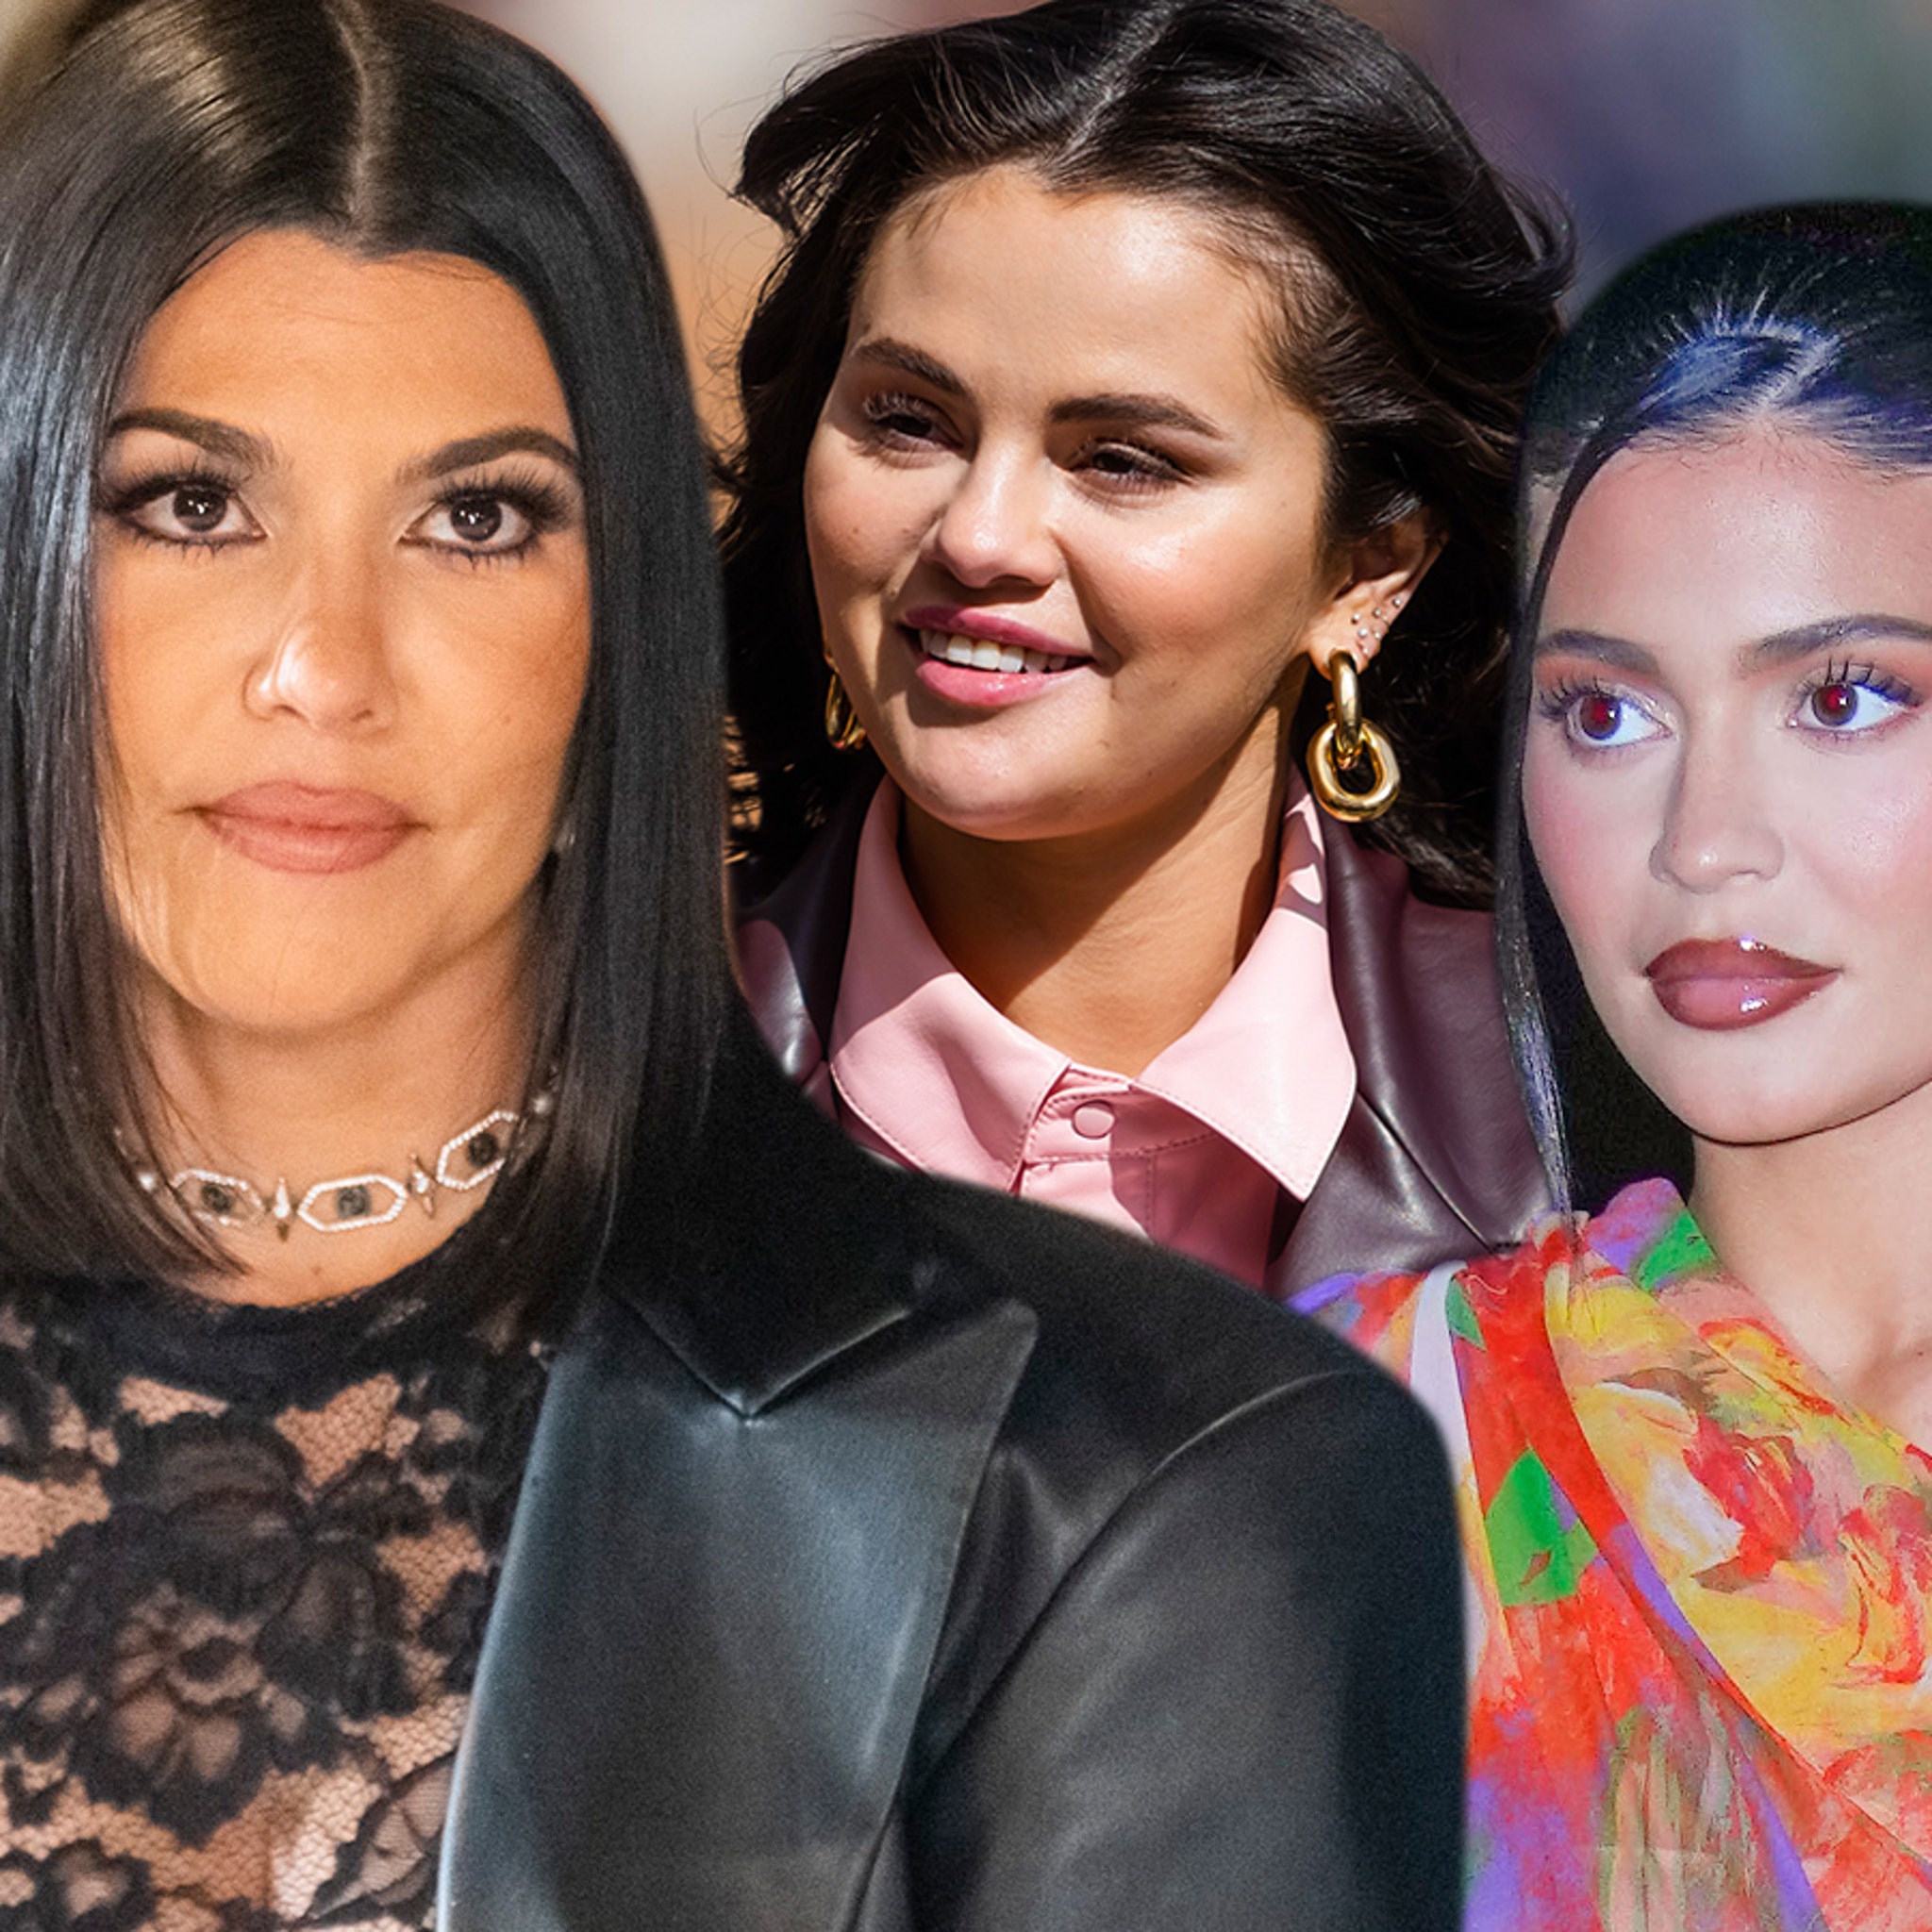 What brands do the Kardashians own and promote?